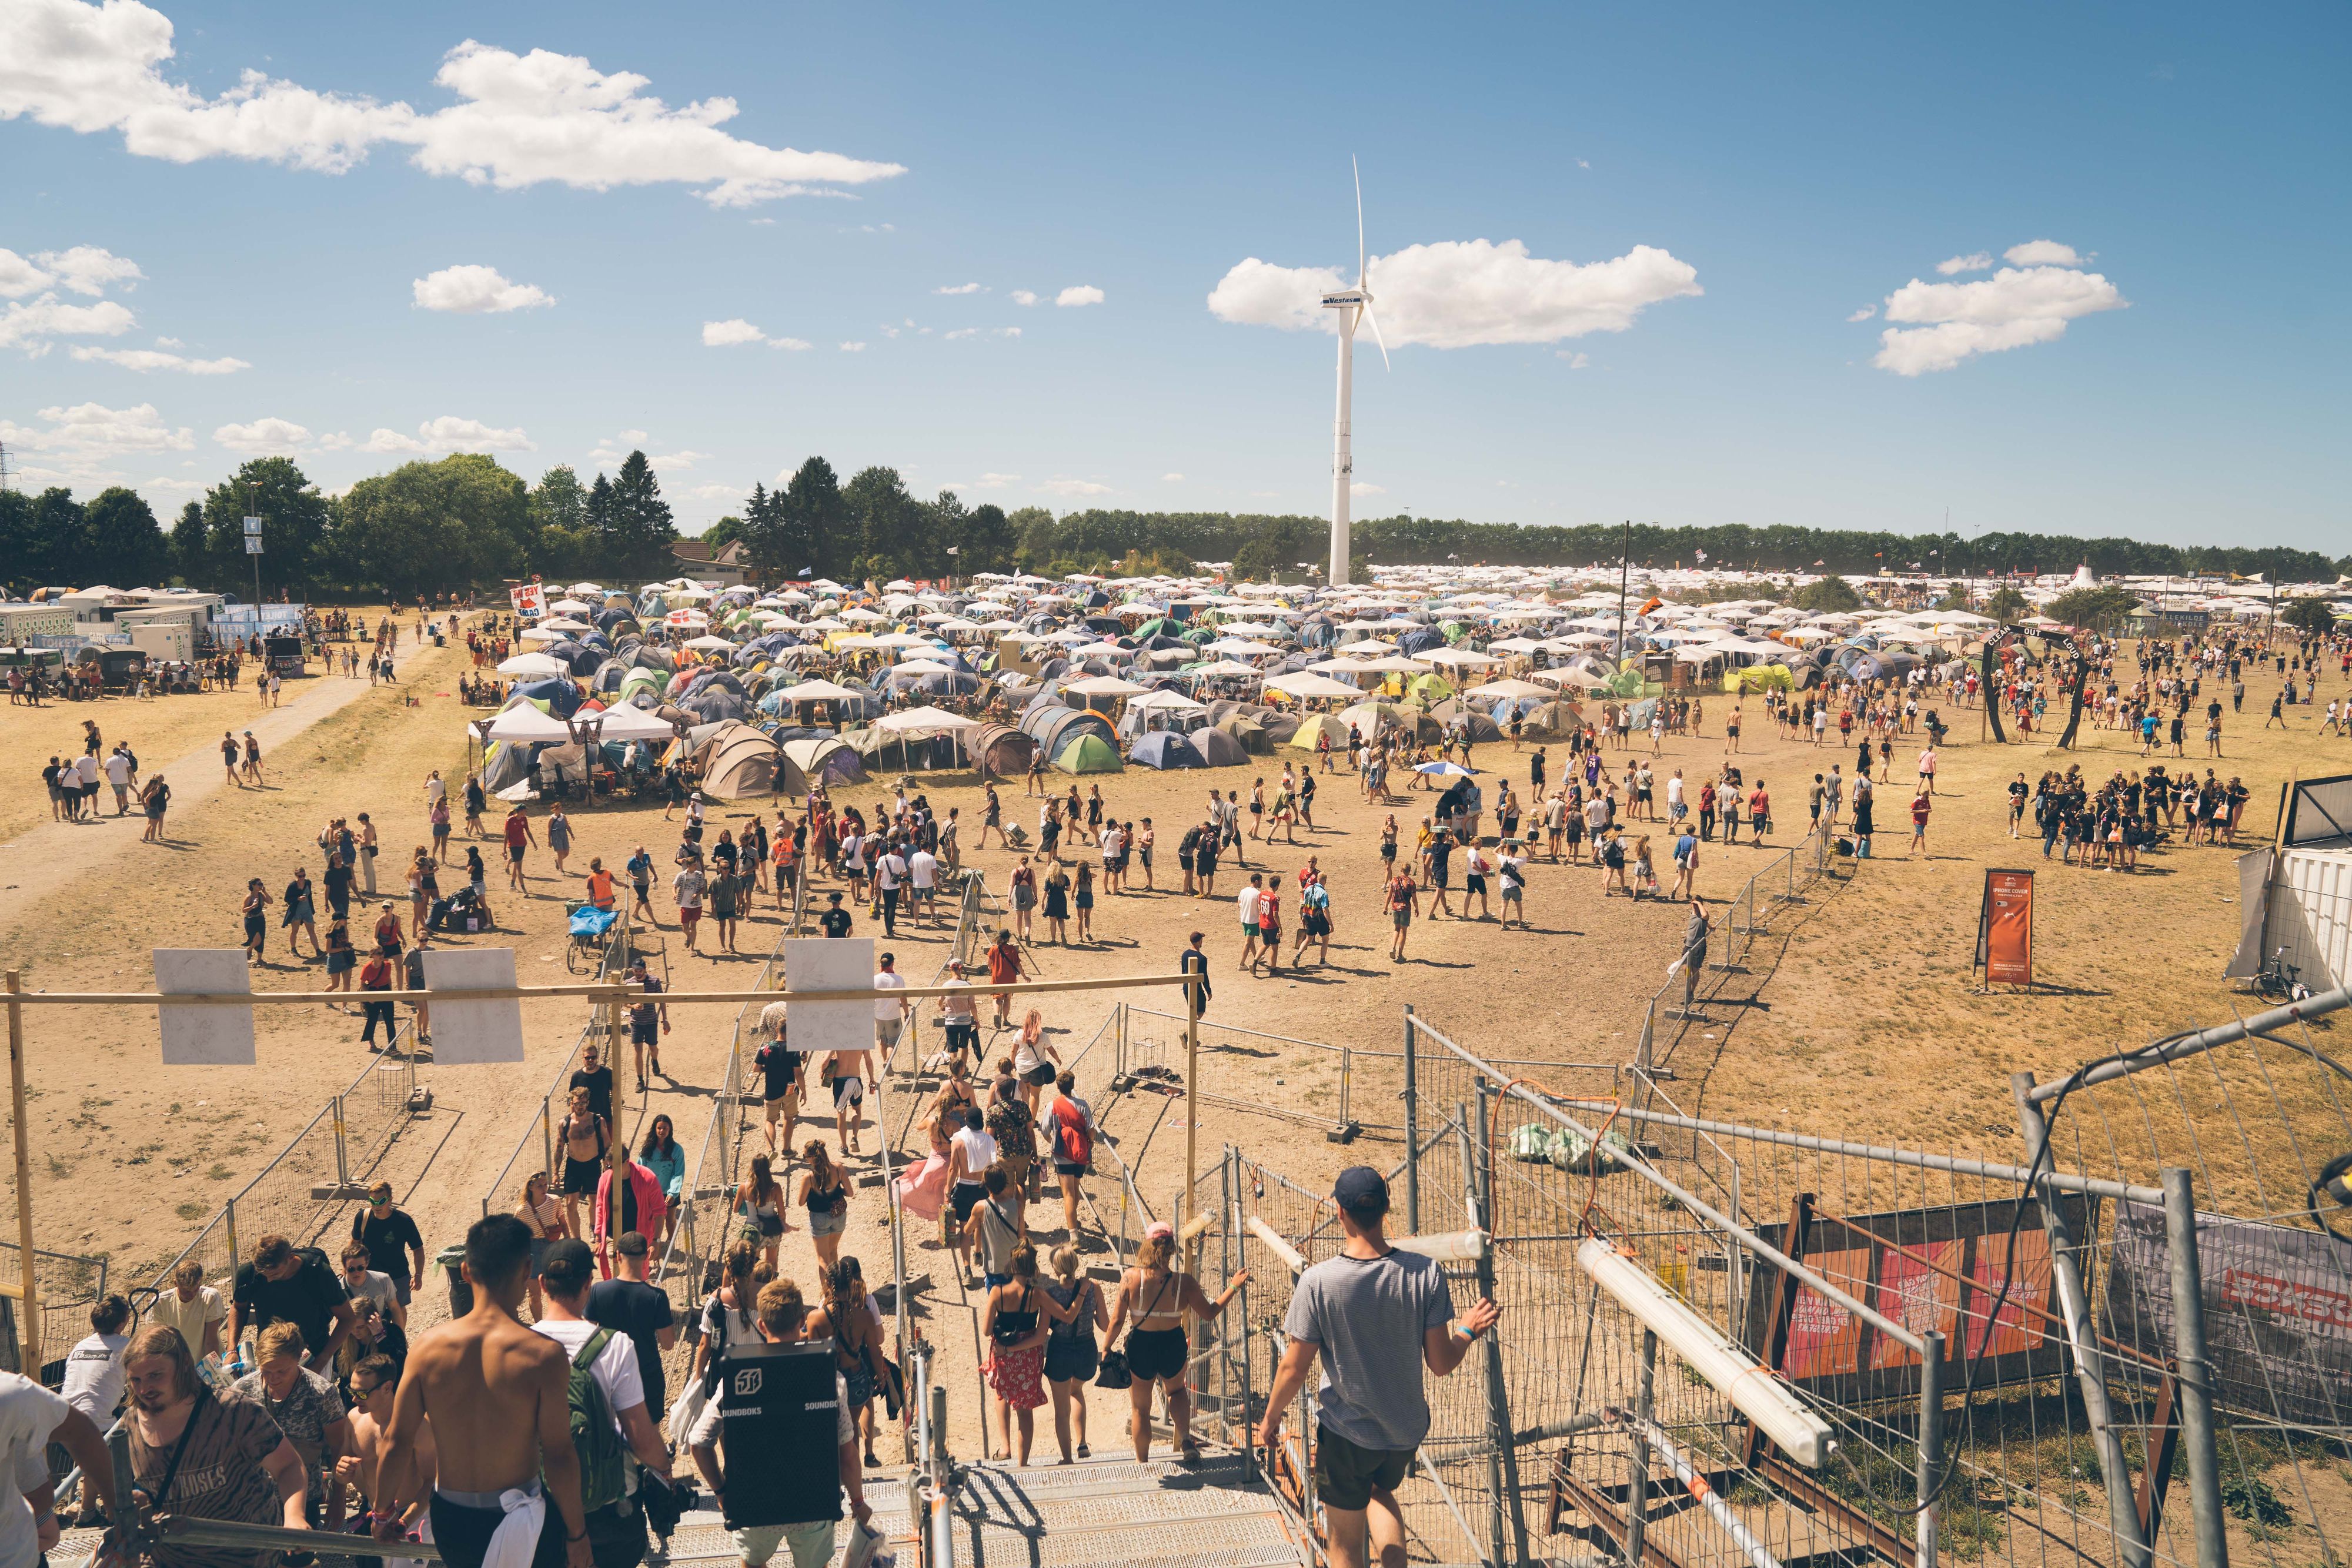 Overview of the Roskilde entrance to all the different camps at the Roskilde Festival 2019